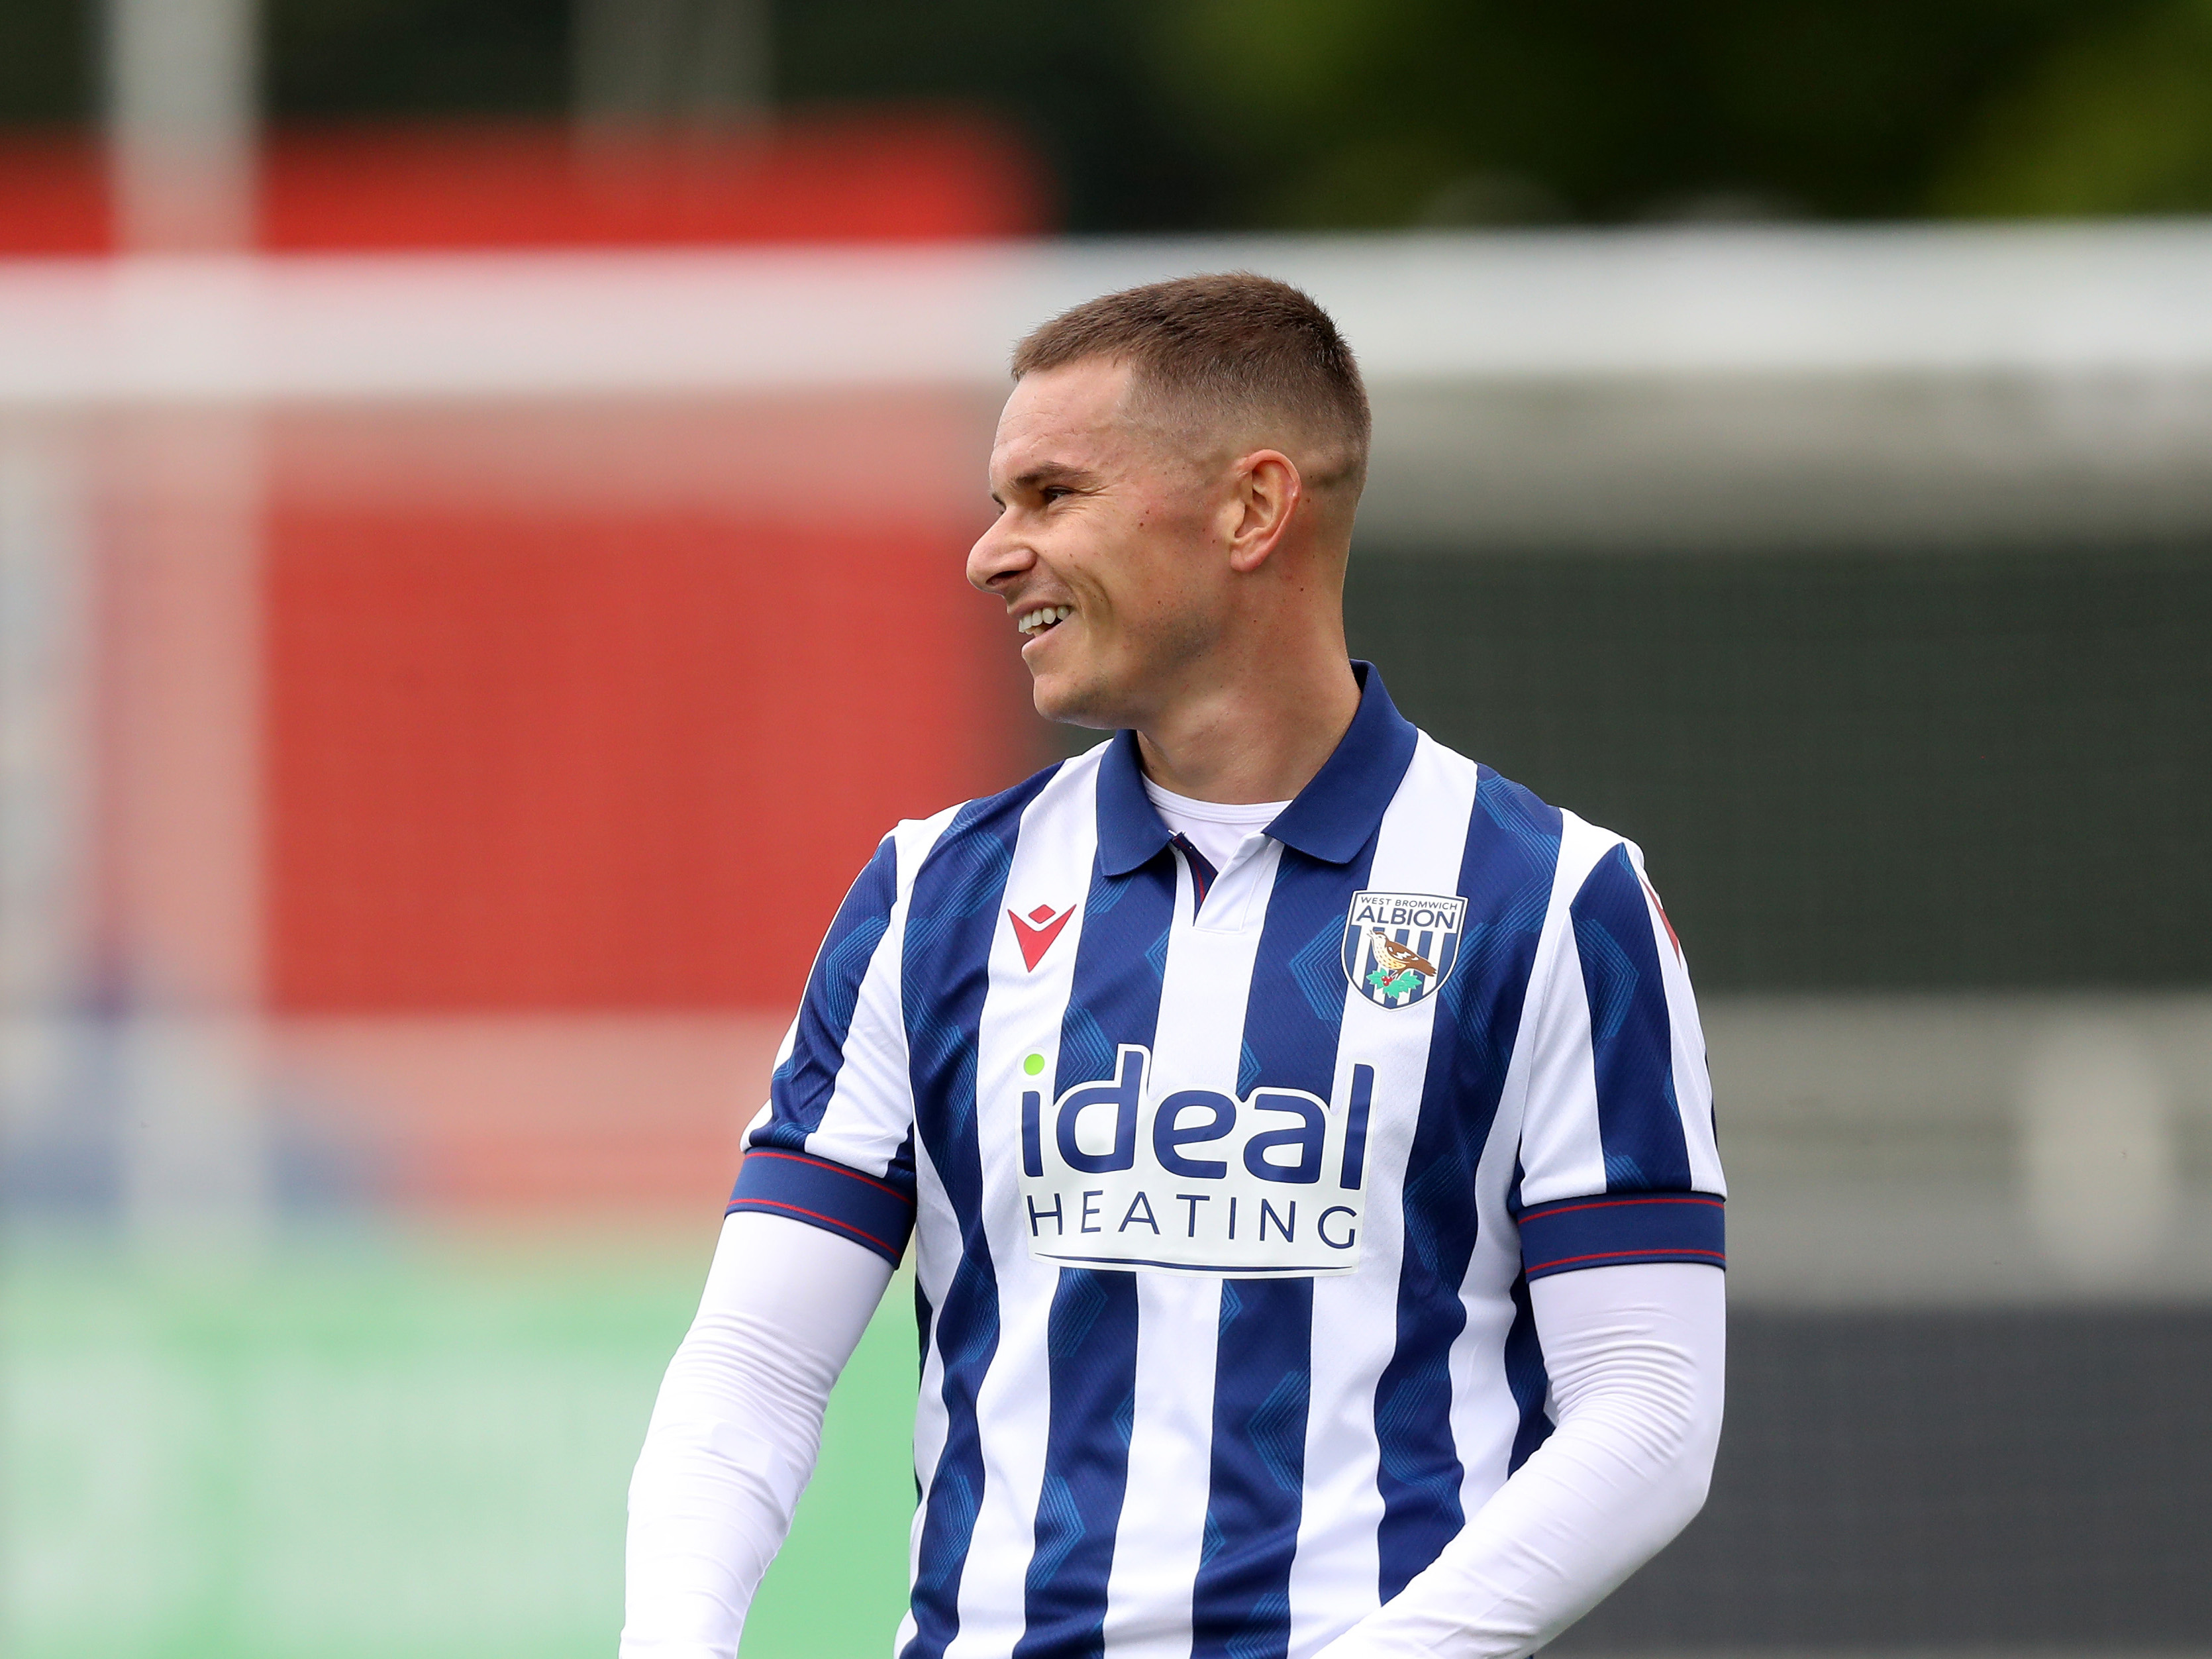 Conor Townsend smiling during a game against Bolton wearing the home kit 